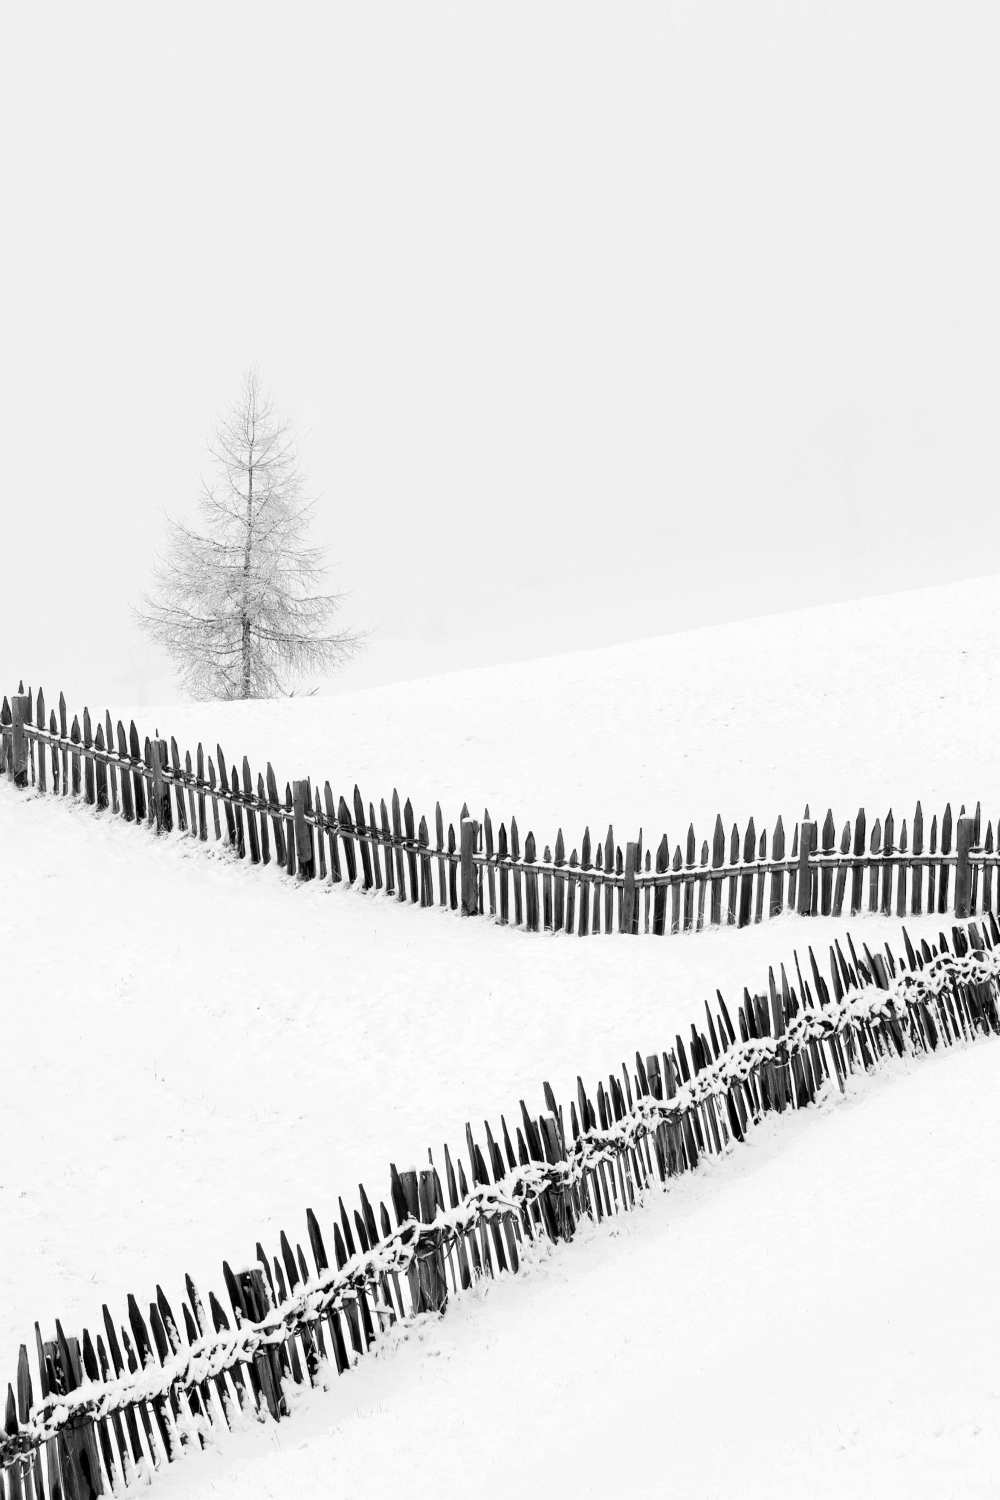 Fences: Playing with lines von Vito Miribung